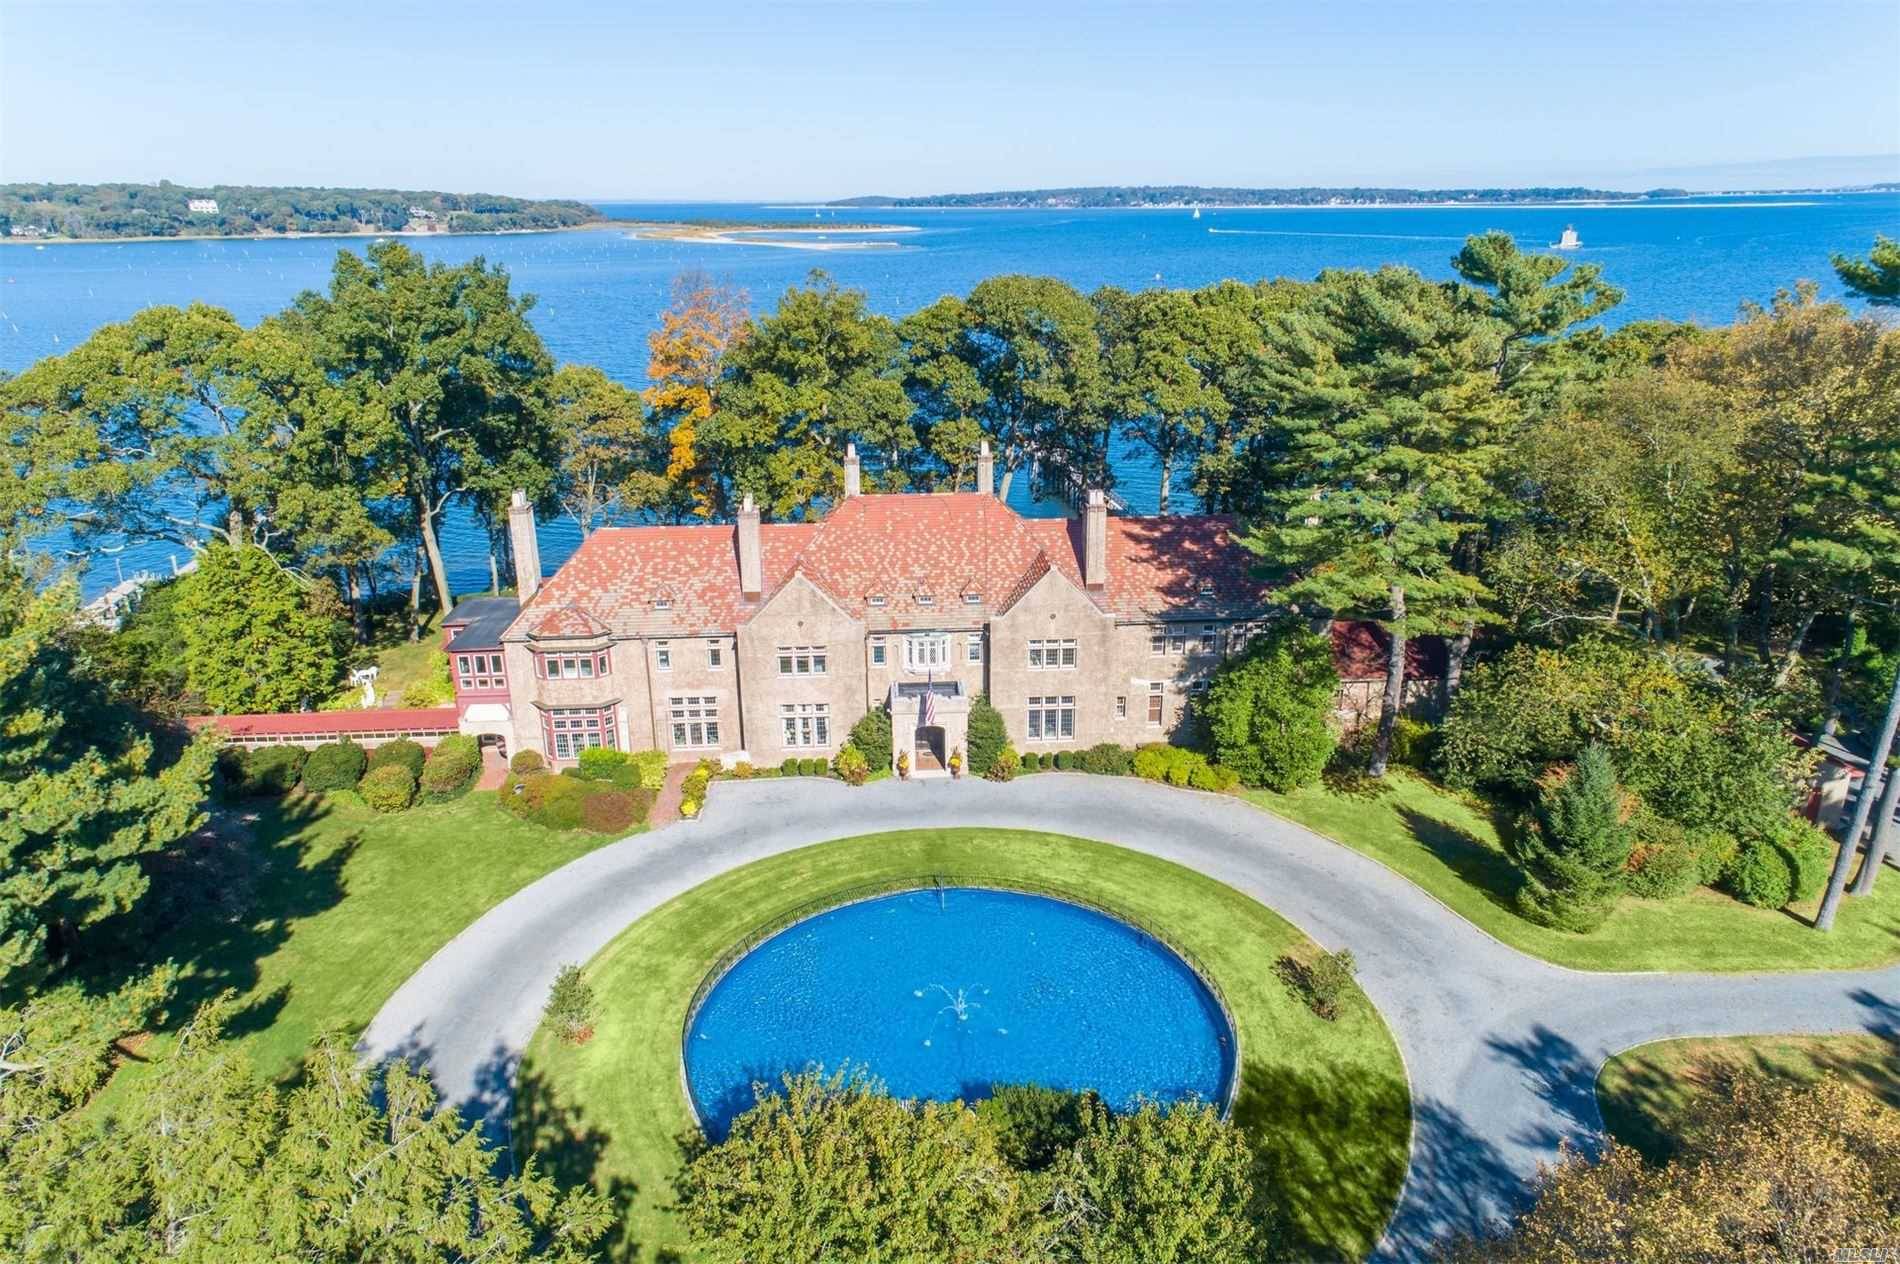 This historic water front estate is perfectly situated on 5 lush acres overlooking Lloyd Harbor.